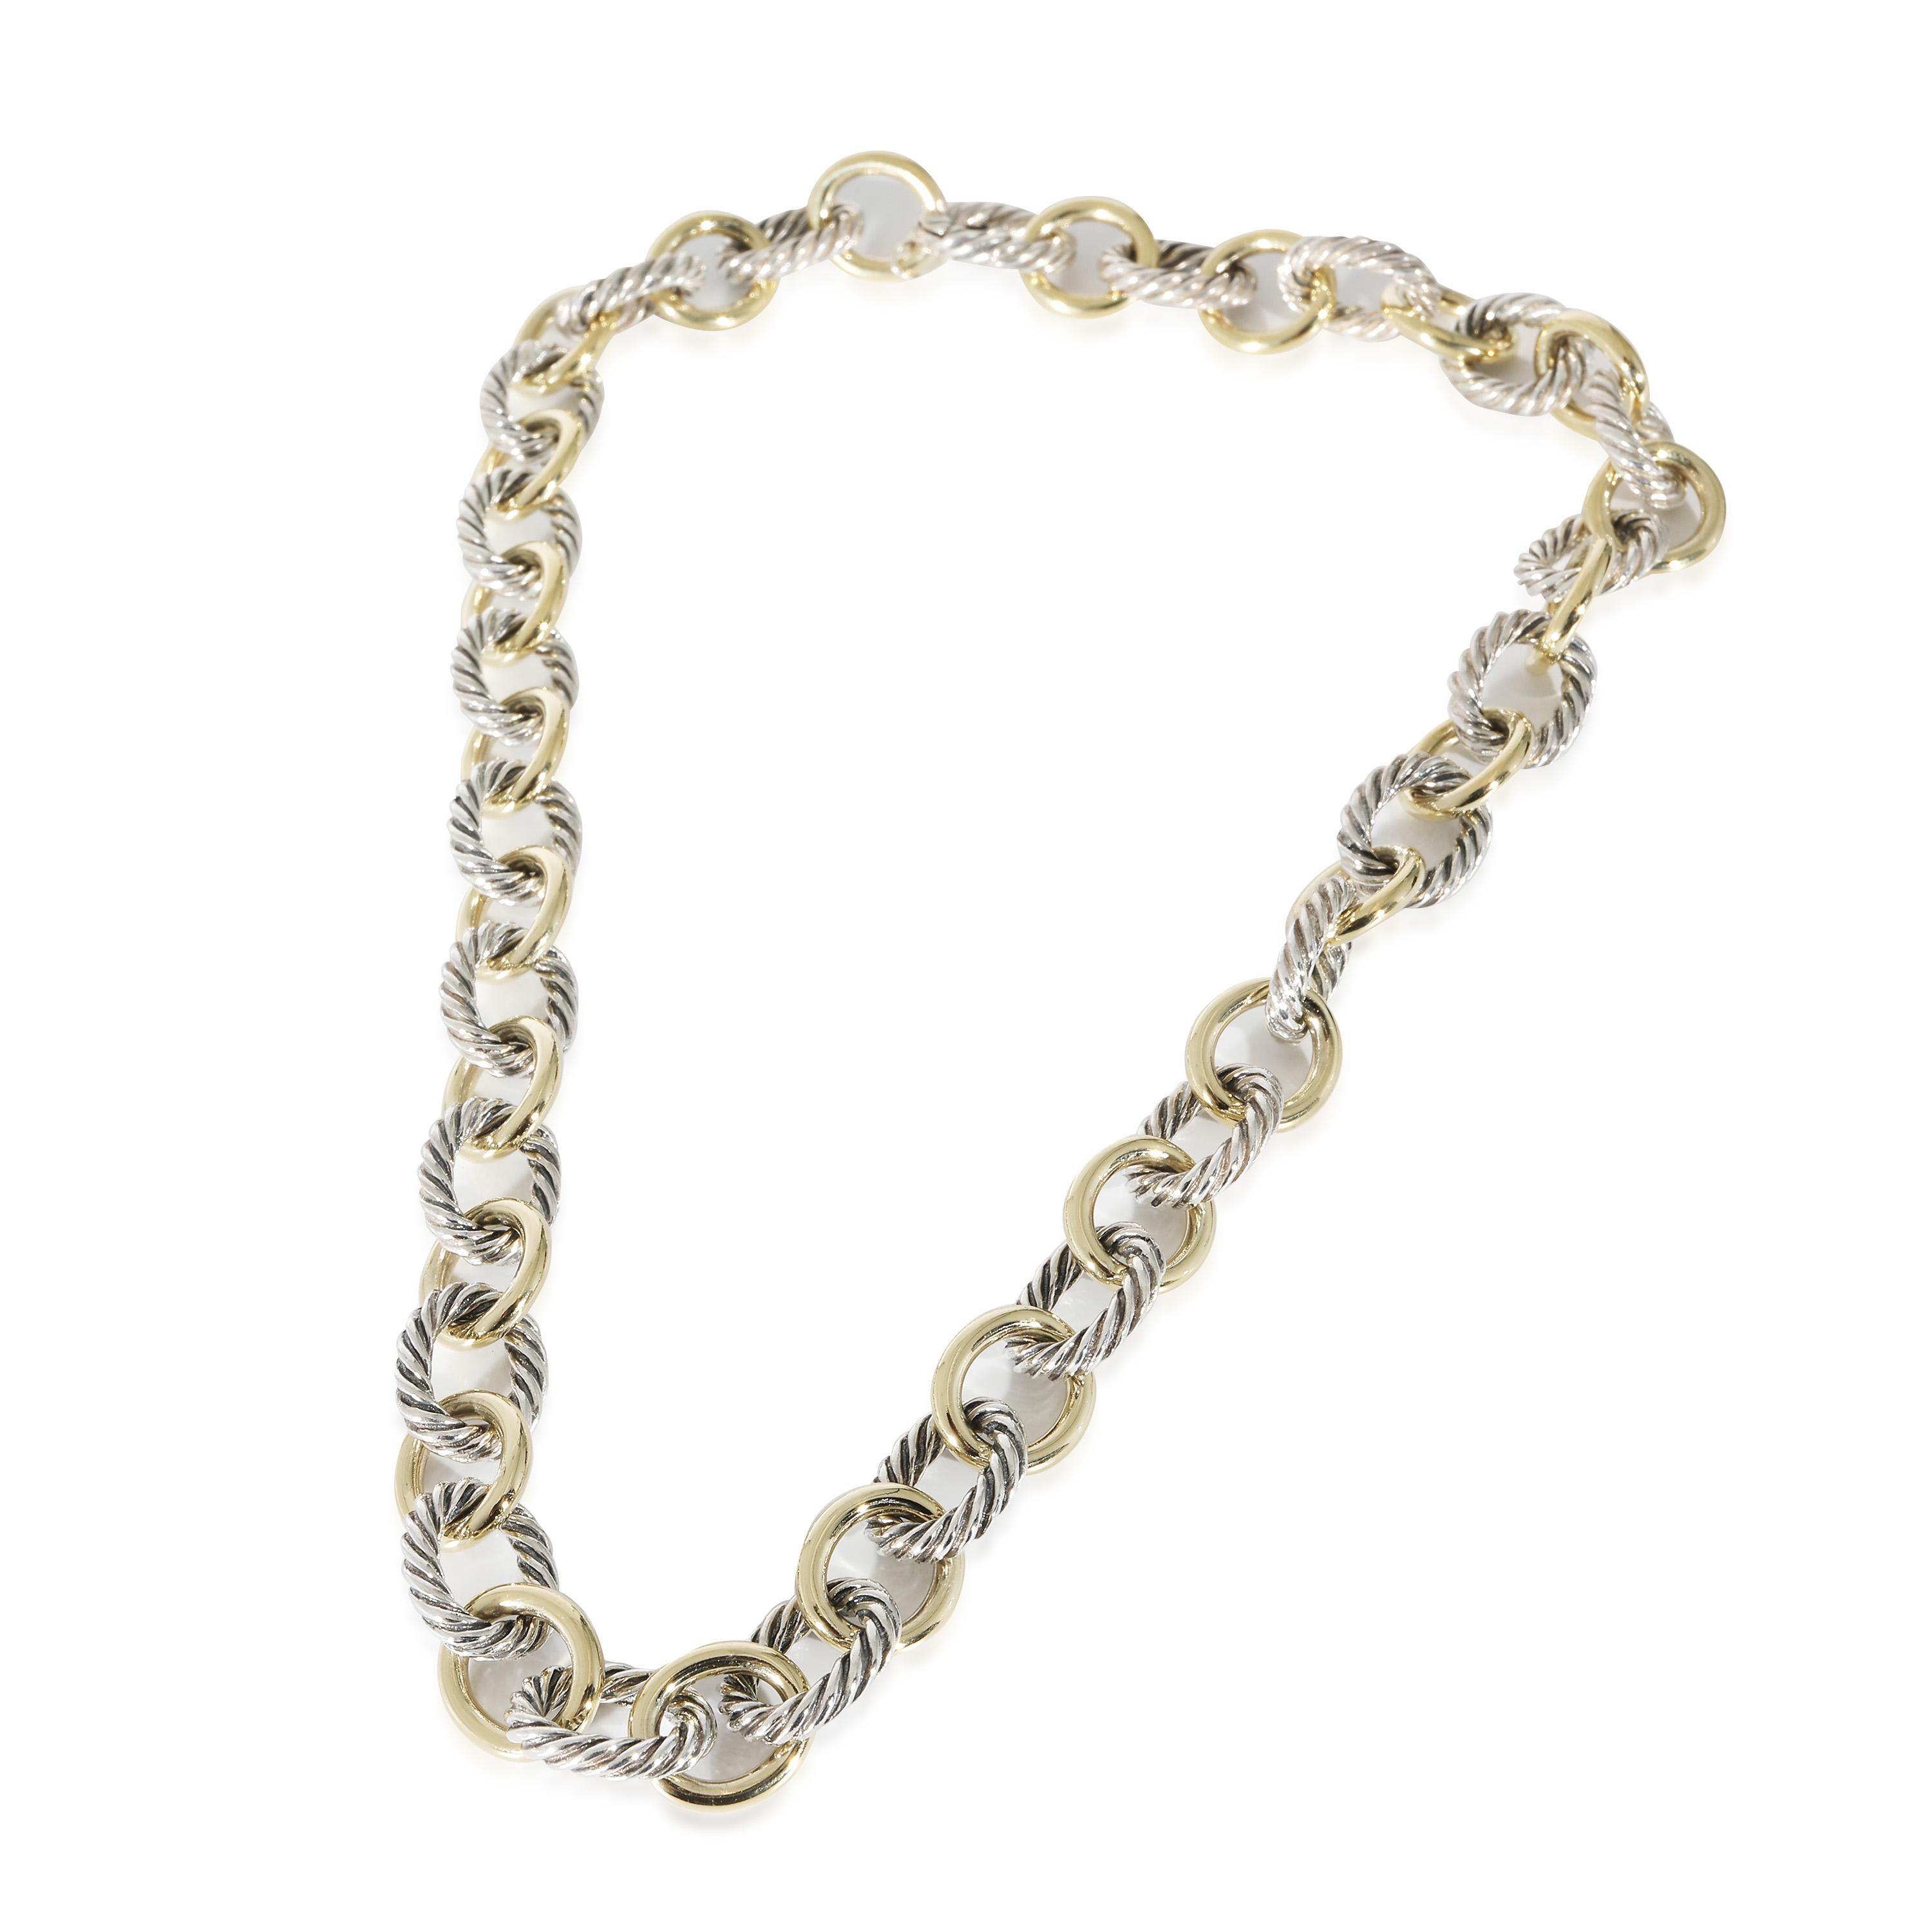 David Yurman Large Oval Link Necklace in 18K Yellow Gold/Sterling Silver

PRIMARY DETAILS
SKU: 135640
Listing Title: David Yurman Large Oval Link Necklace in 18K Yellow Gold/Sterling Silver
Condition Description: Retails for 3650 USD. In excellent